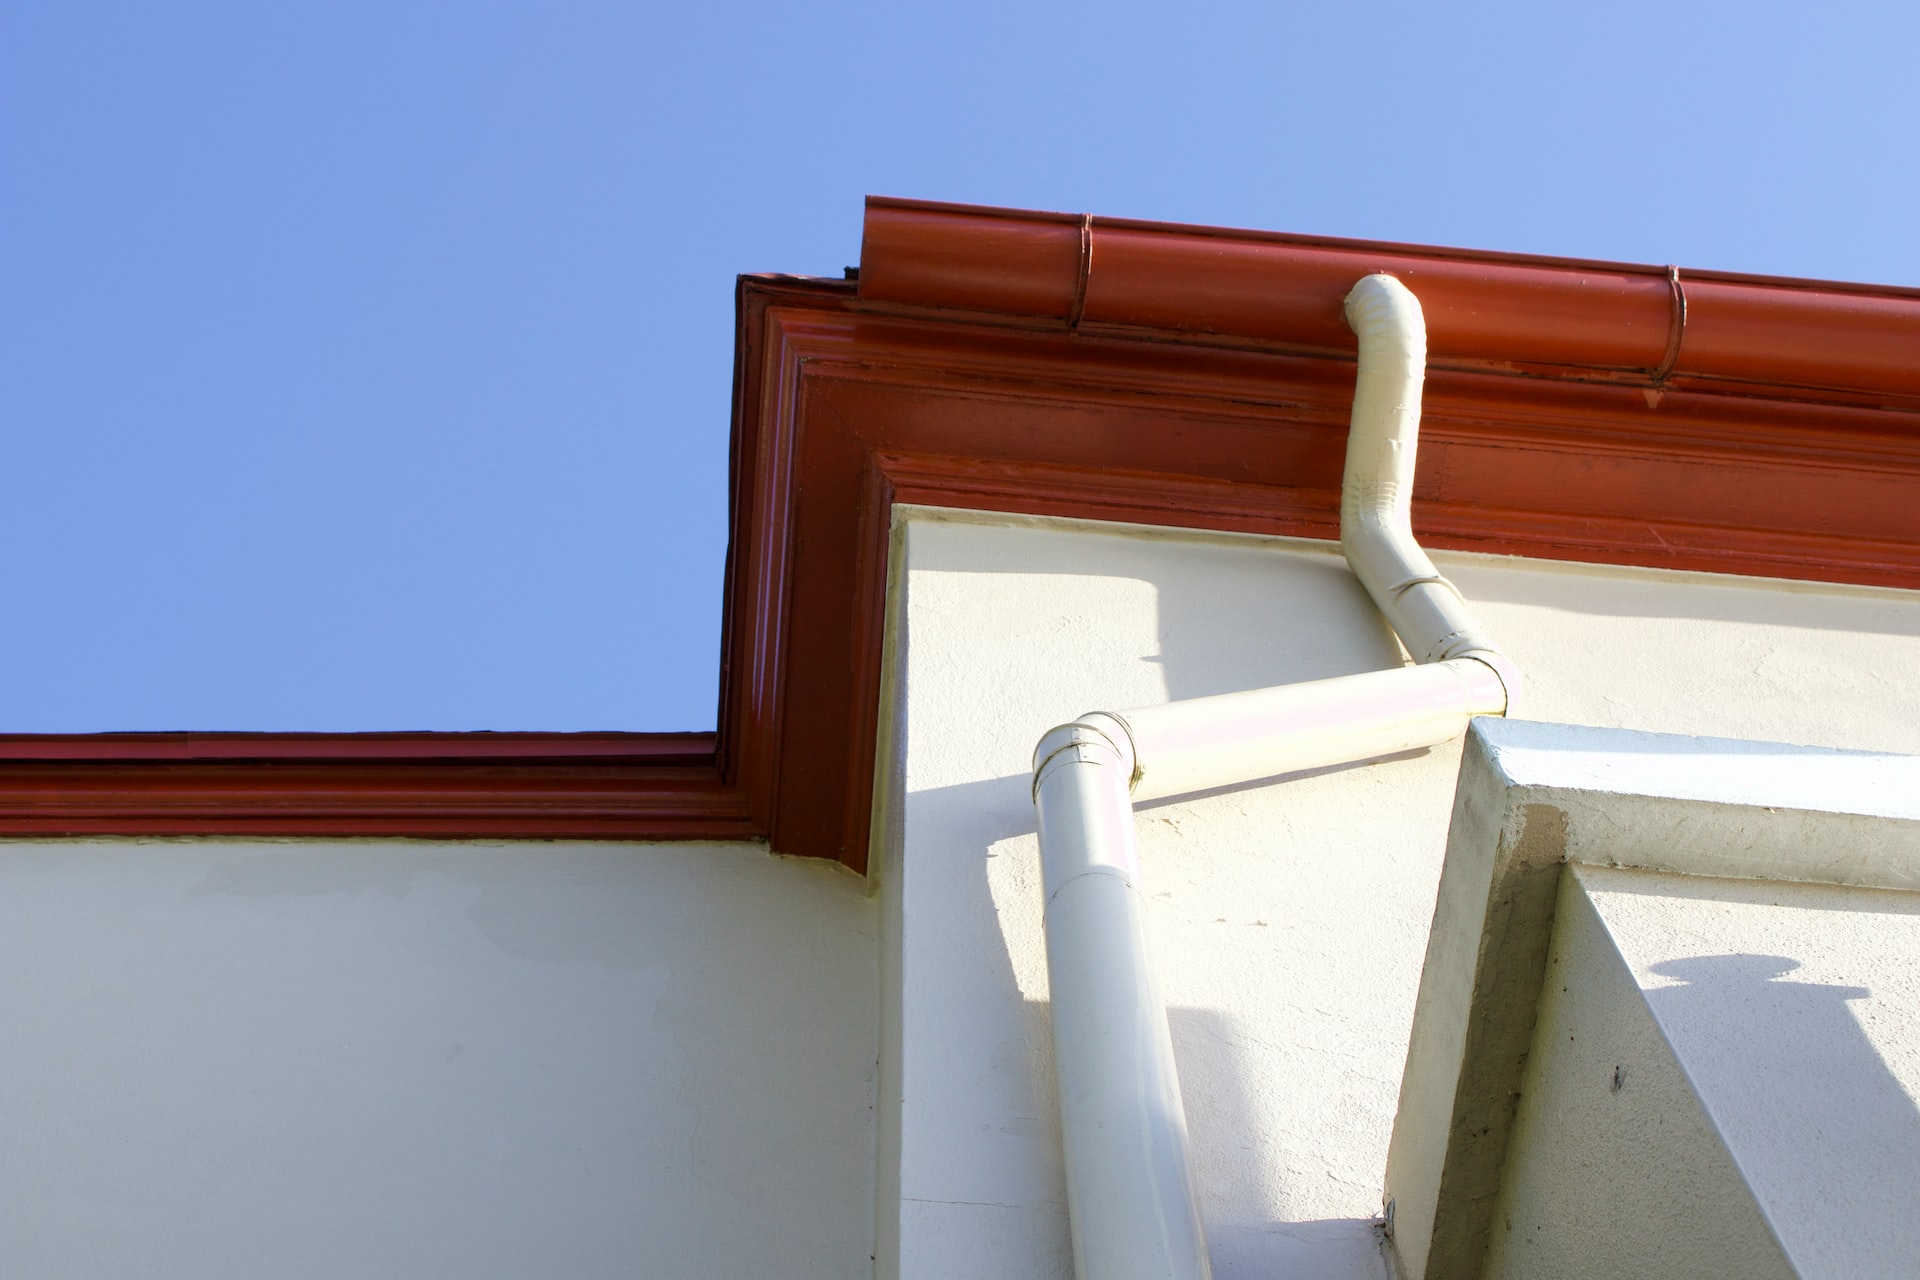 Gutters and drainpipe framed against the sky